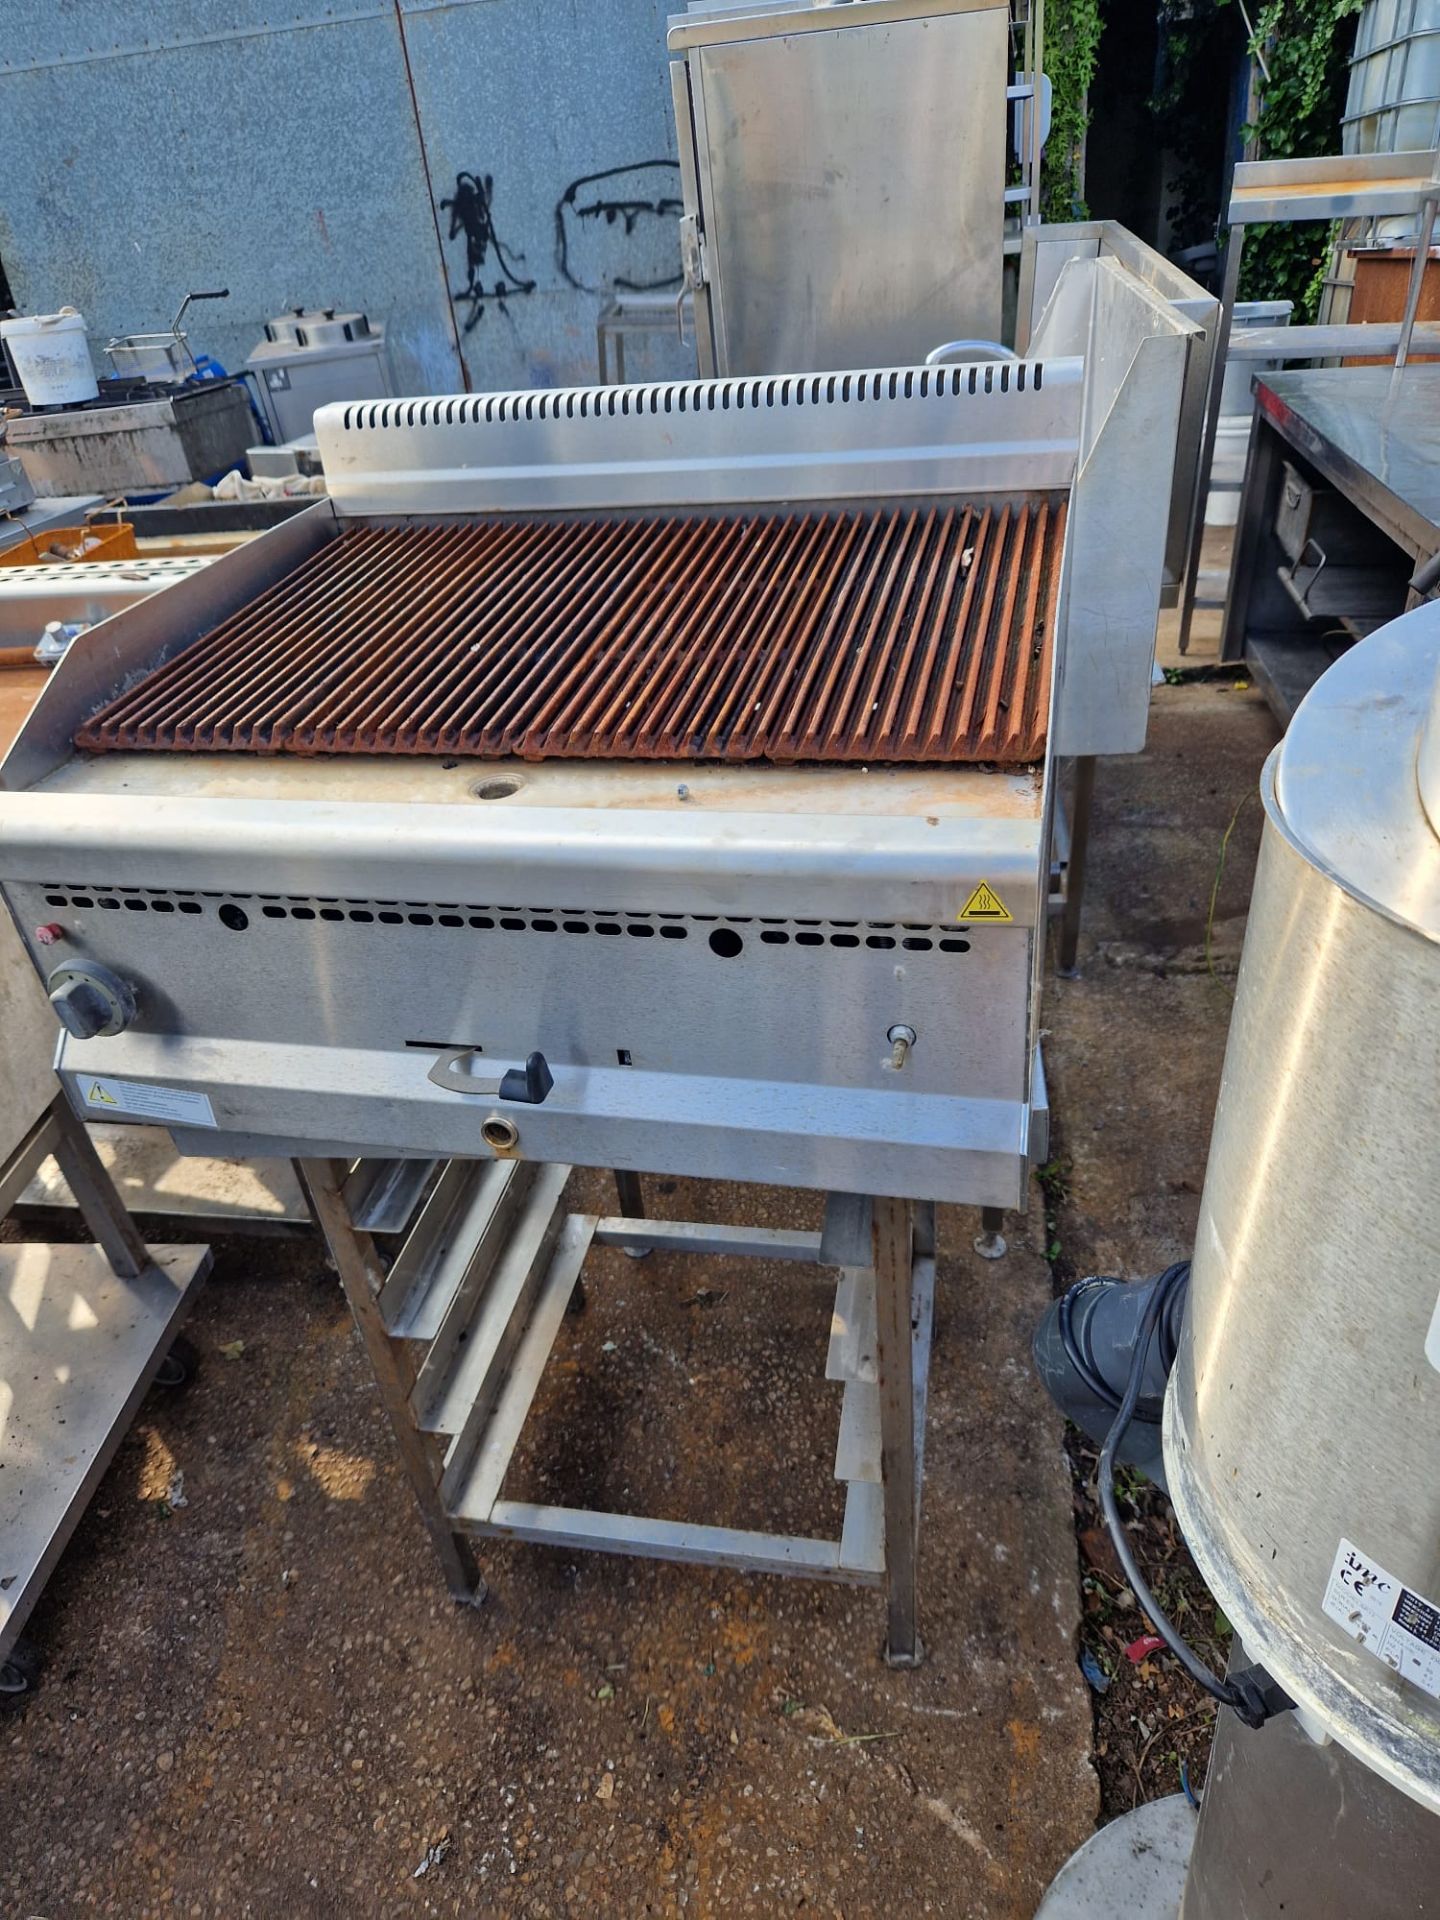 CHARGRILL WITH WATER TRAY - MADE IN TURKEY - FULLY WORKING - NEEDS CLEANING UP - 800 MM W 